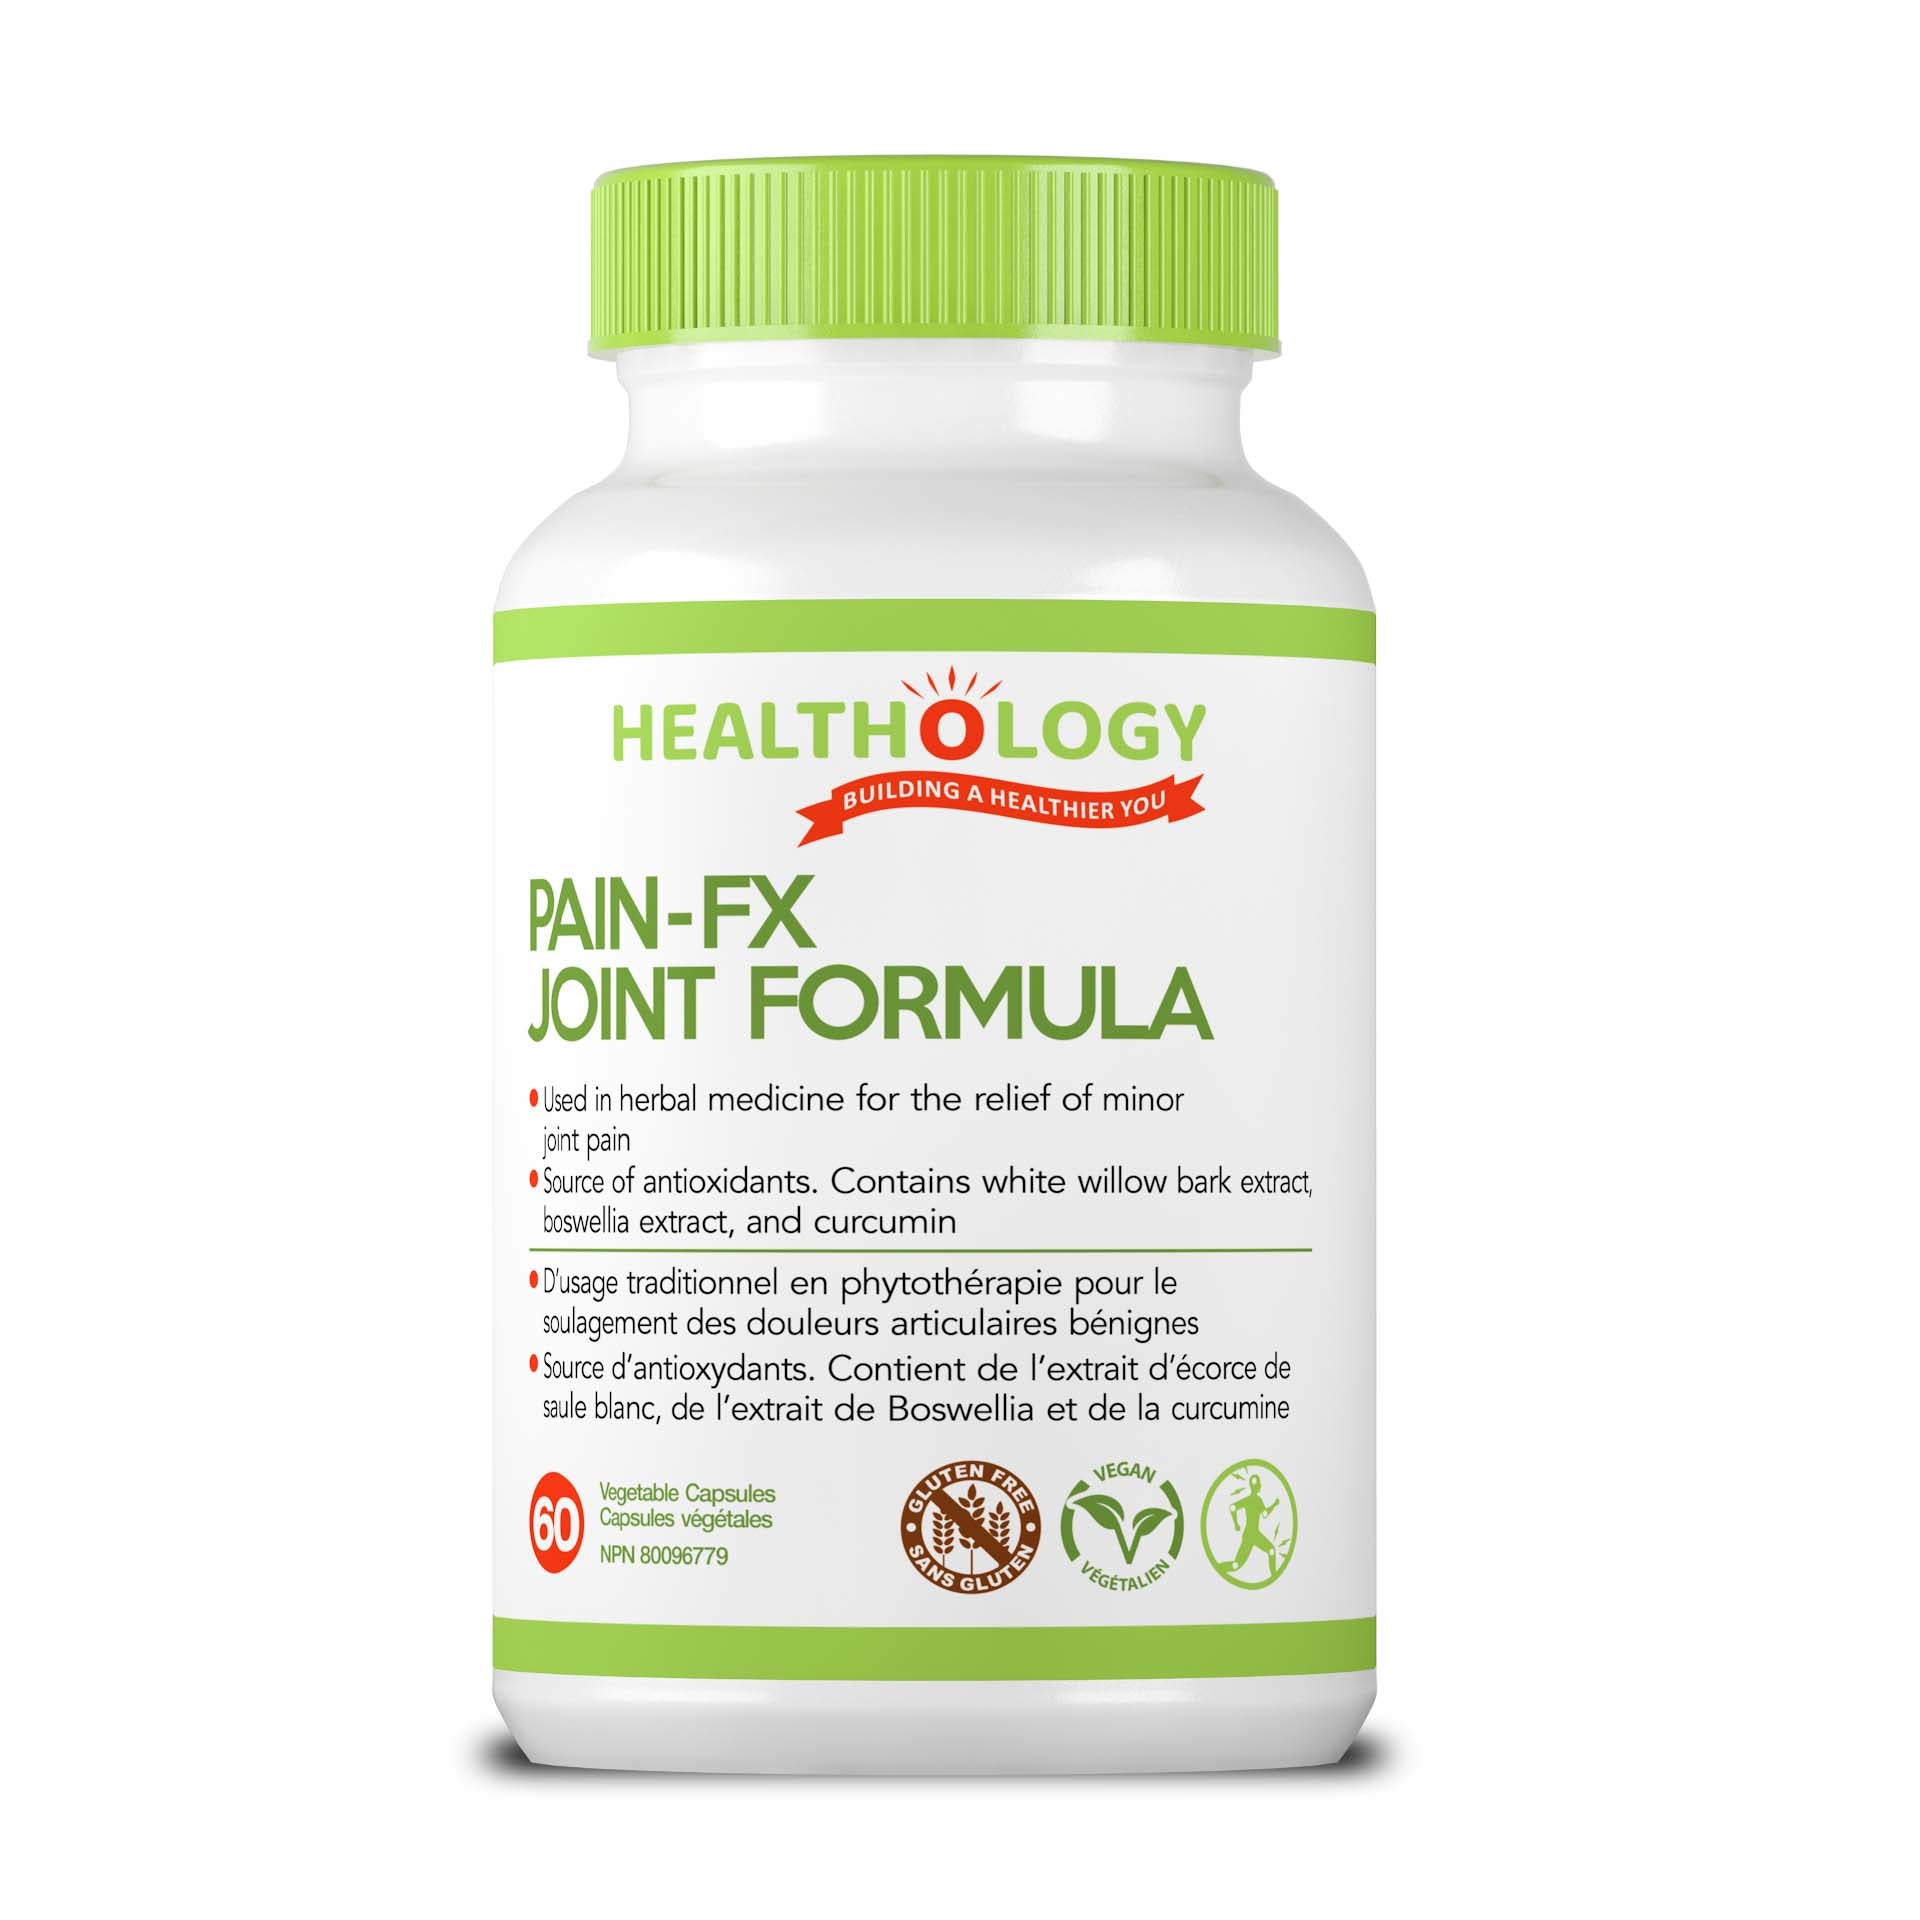 Healthology Pain- FX Joint Formula 60 Vegetarian Capsules  Buy Canada, Buy Local, Buy Independent.  Description  Pain is the body’s way of telling us that something is wrong. It might be due to an injury, exposure to an irritant, wear-and-tear, or a chronic health issue. When we feel pain, our body is sending a signal to the brain that says, “Look over here! We don’t like this! Make this stop!”. If the pain source is something as simple as a pebble in our shoe, we simply remove the pebble and move on.